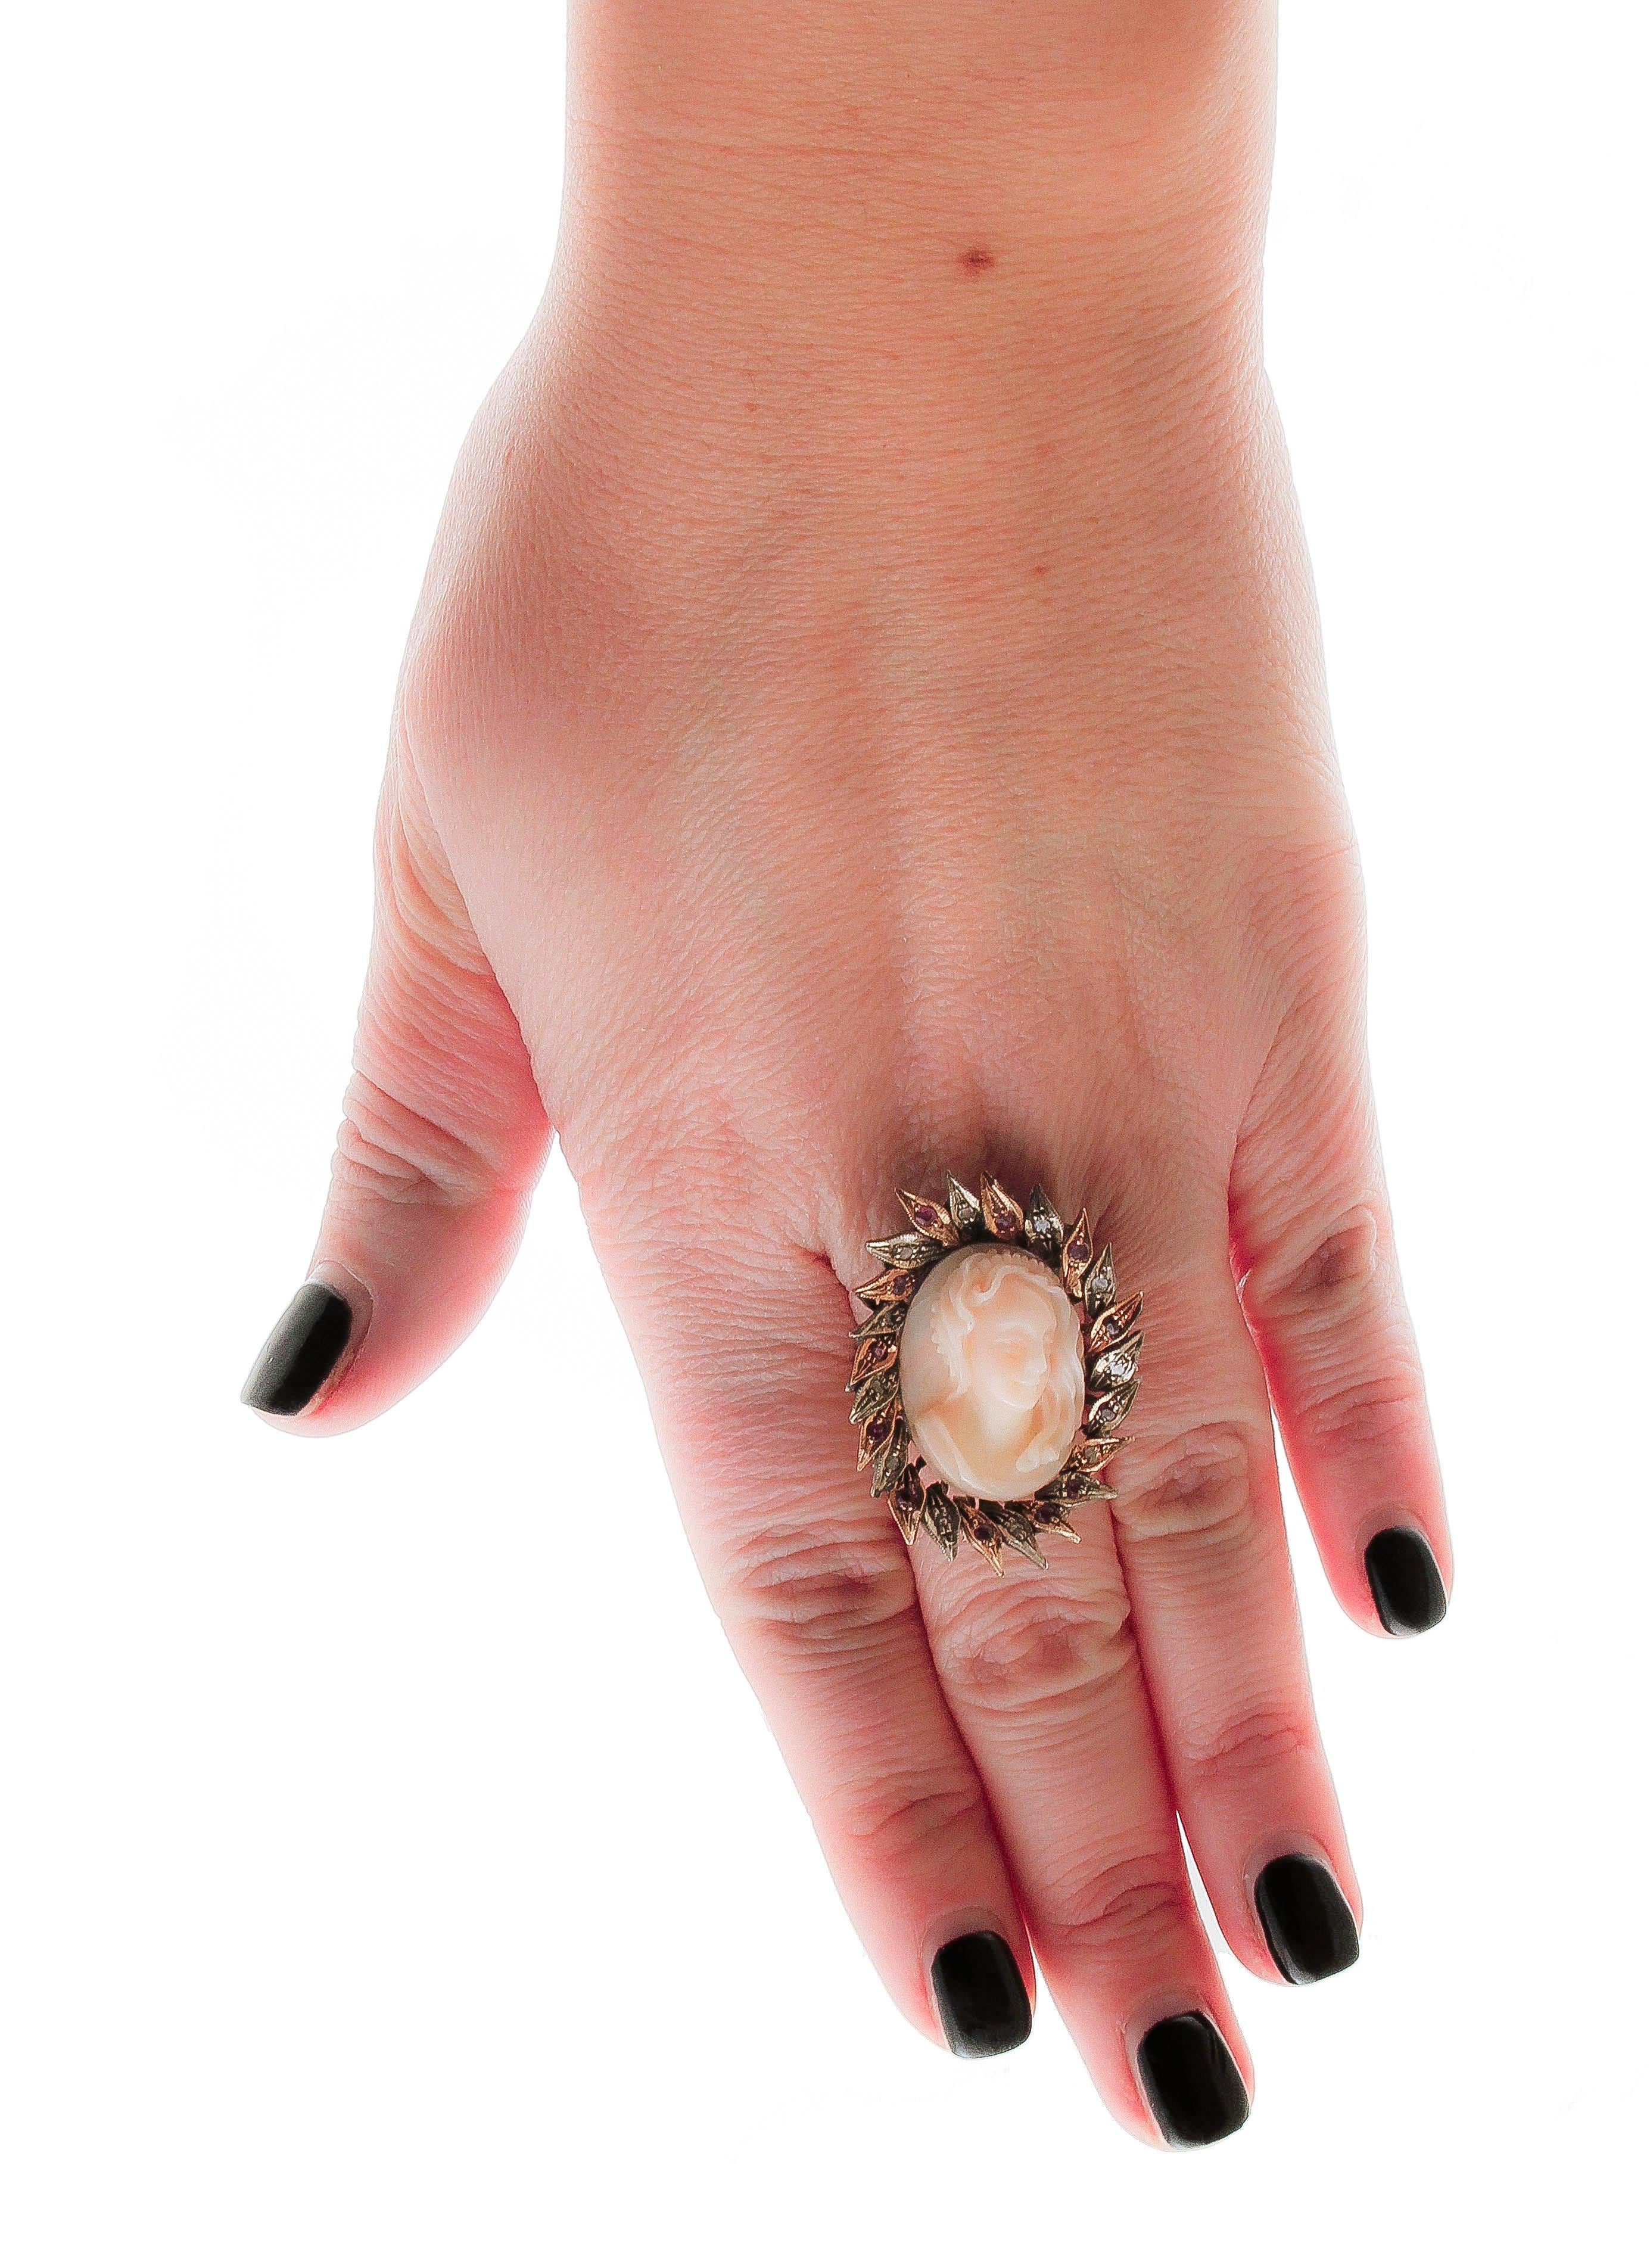 Round Cut Diamonds, Rubies, Pink Coral, Rose Gold and Silver Cluster Retrò Ring